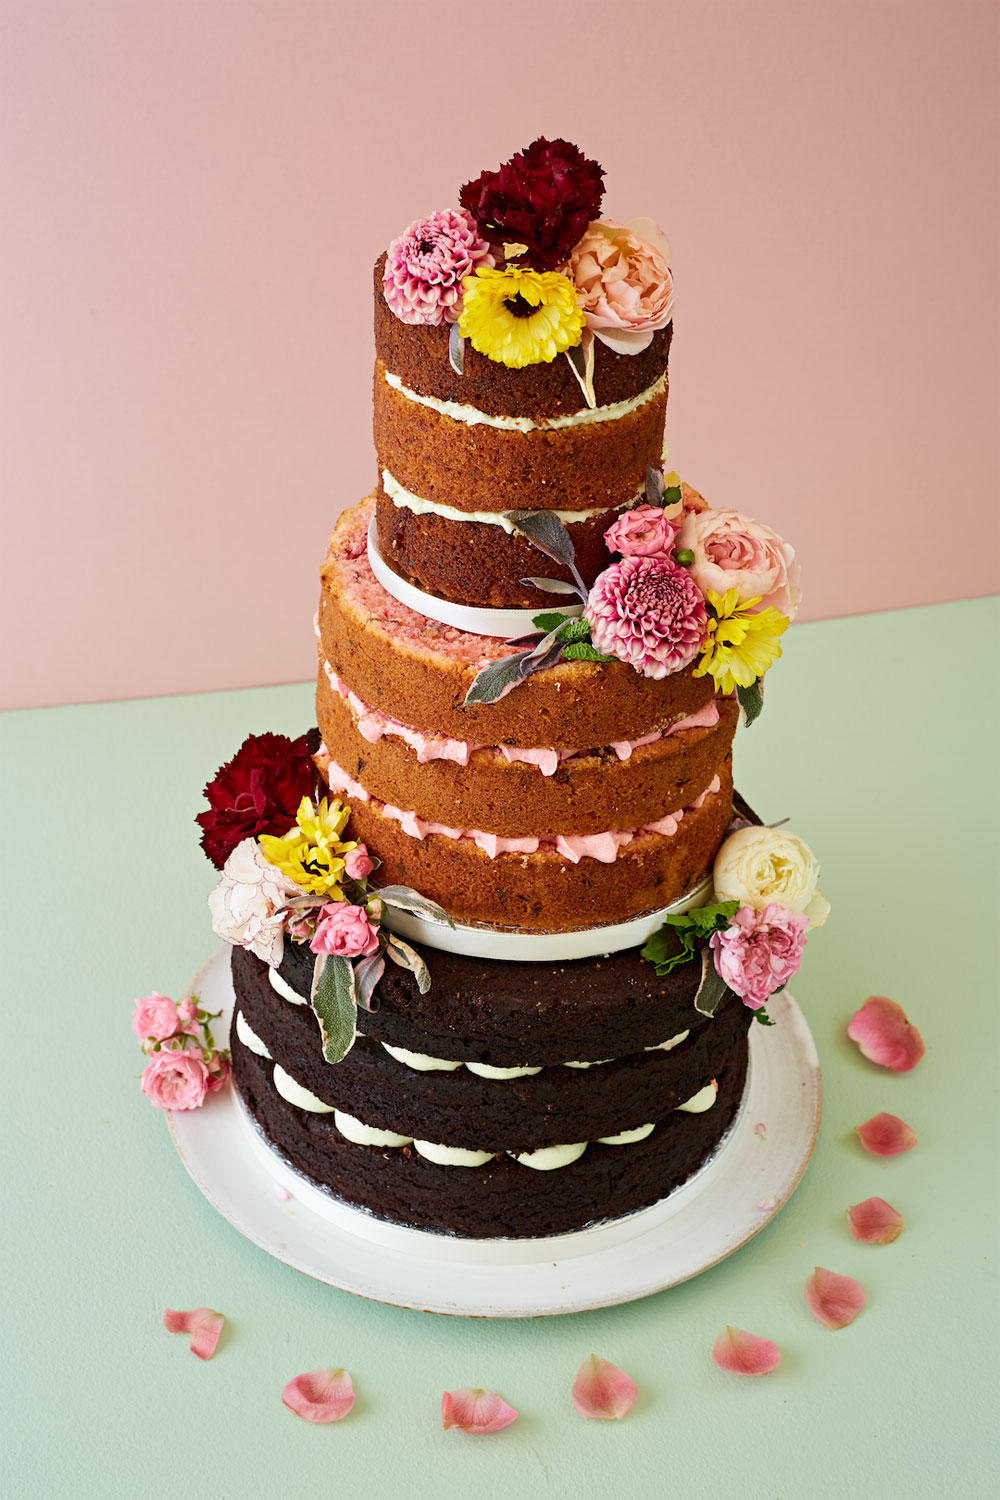 How To Decorate  A Wedding Or Celebration Cake  With Edible 